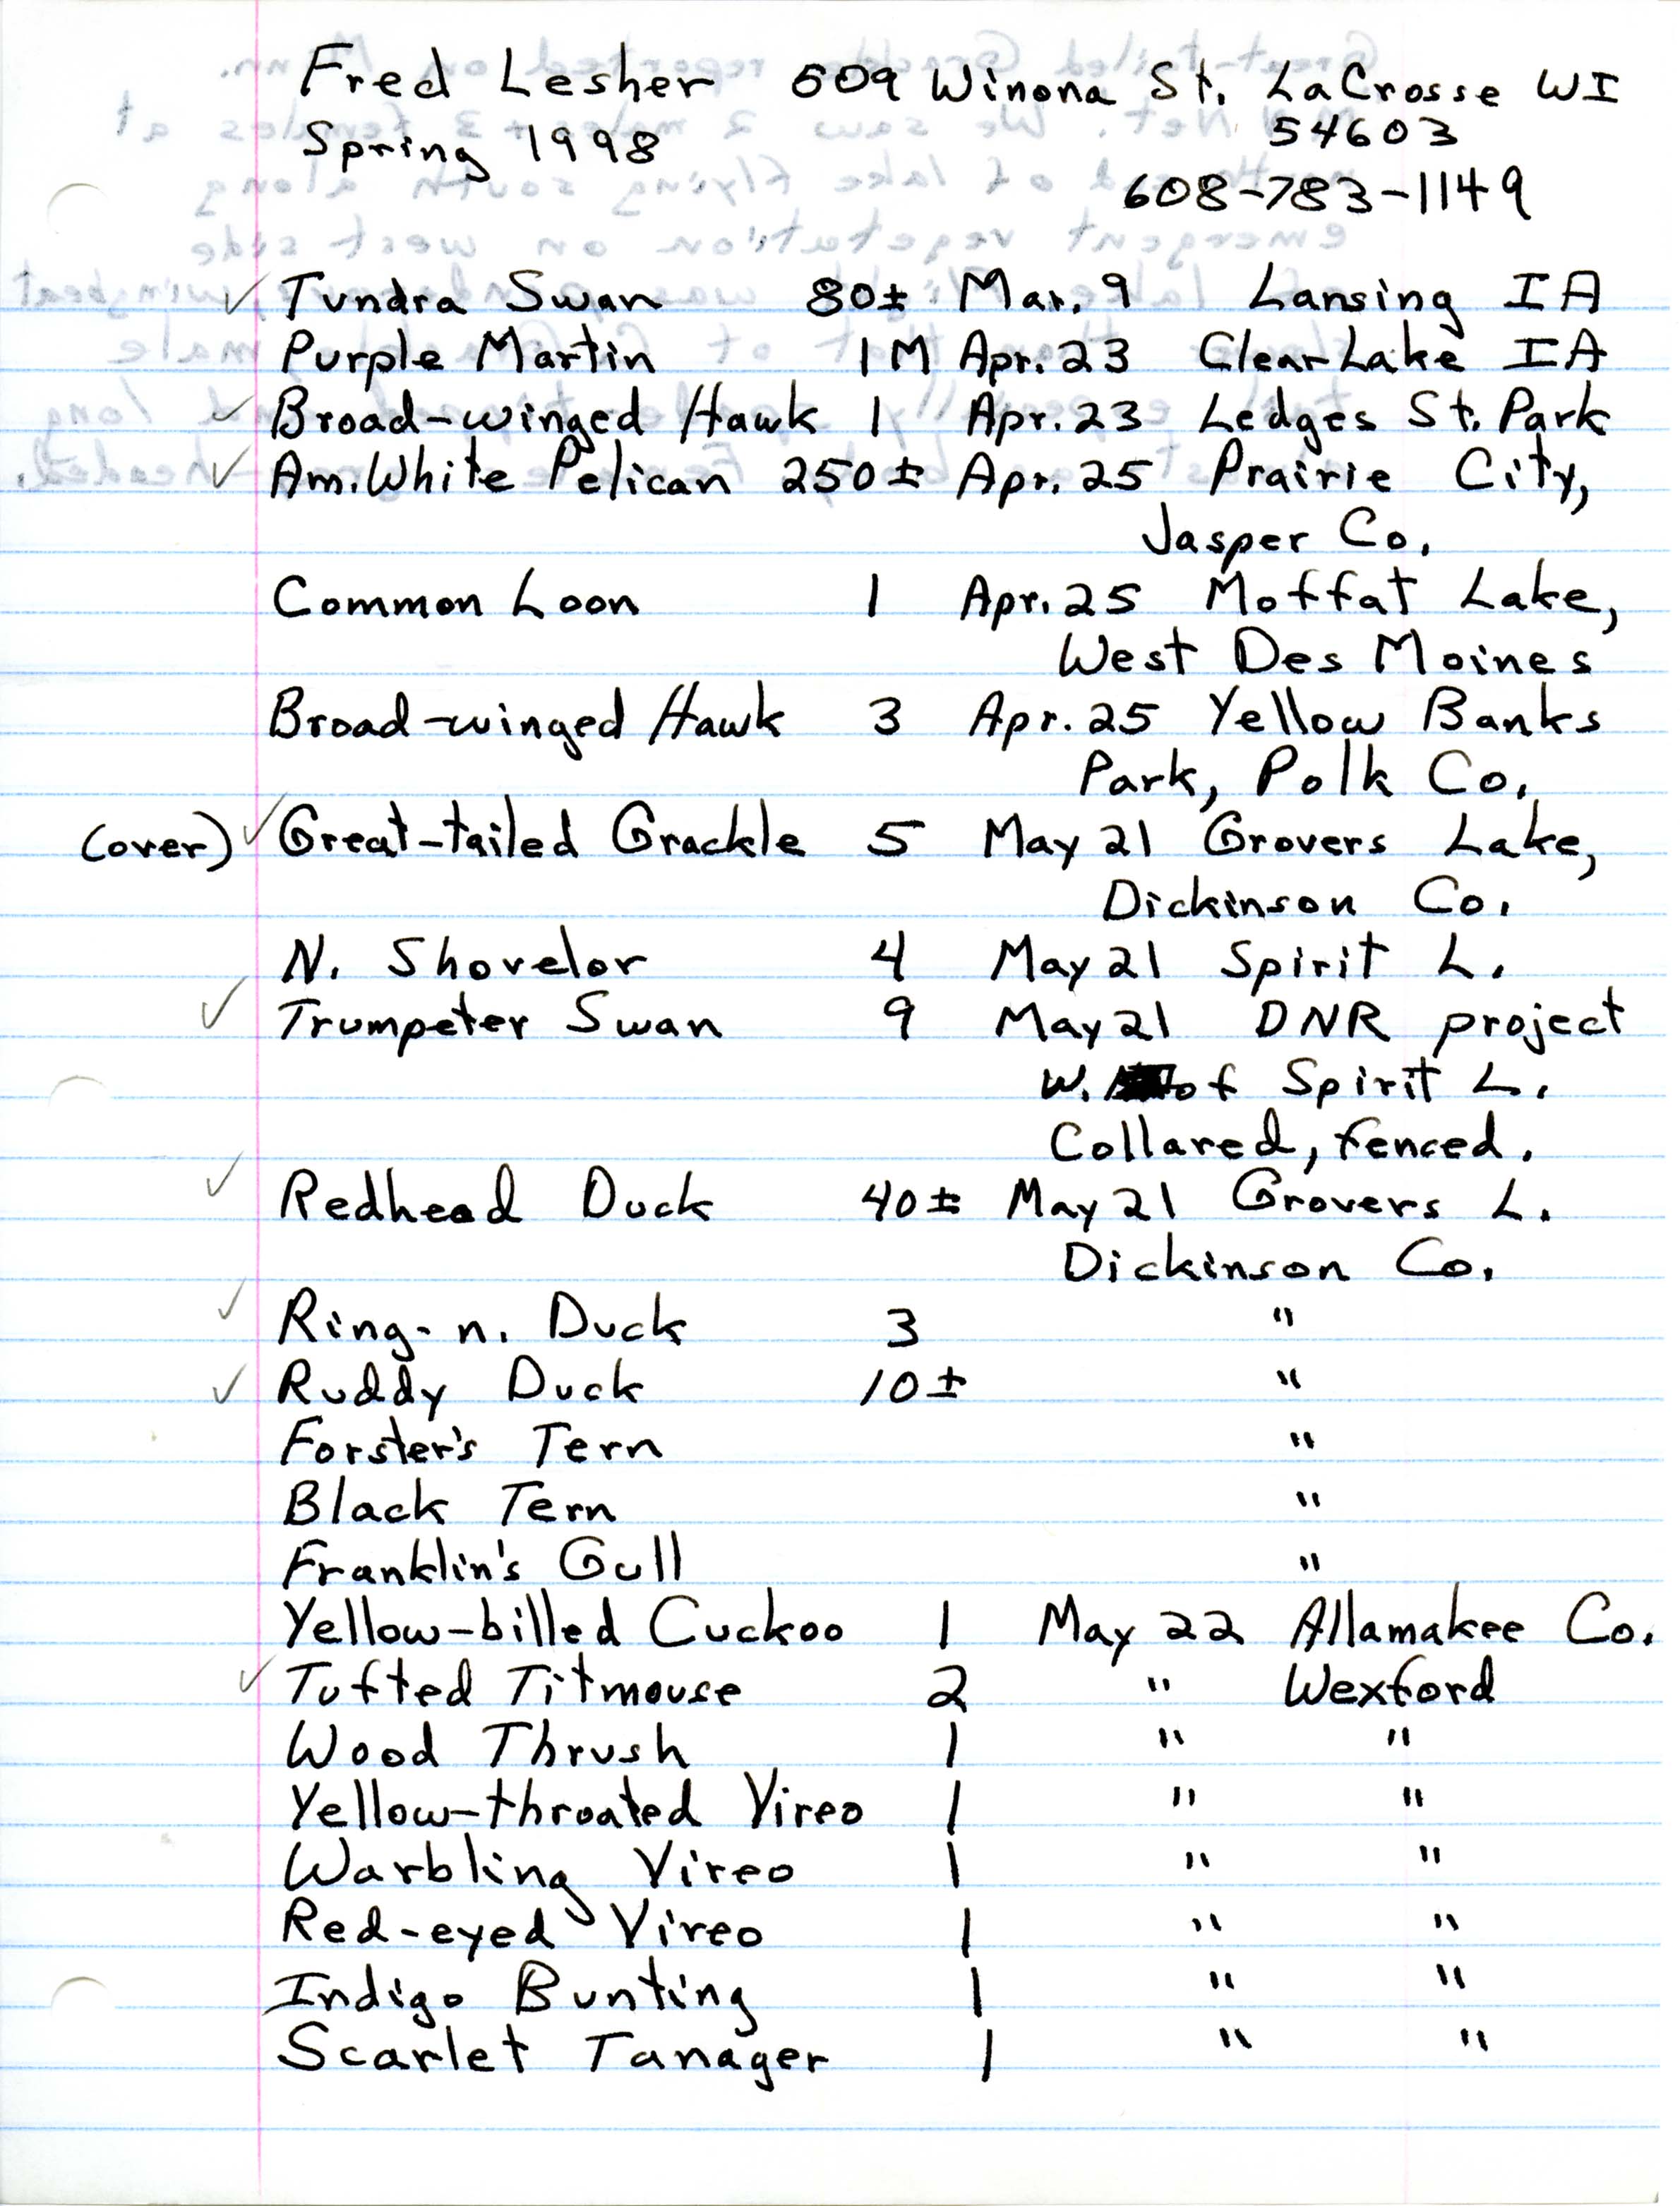 Annotated bird sighting list for spring 1998 compiled by Fred Lesher